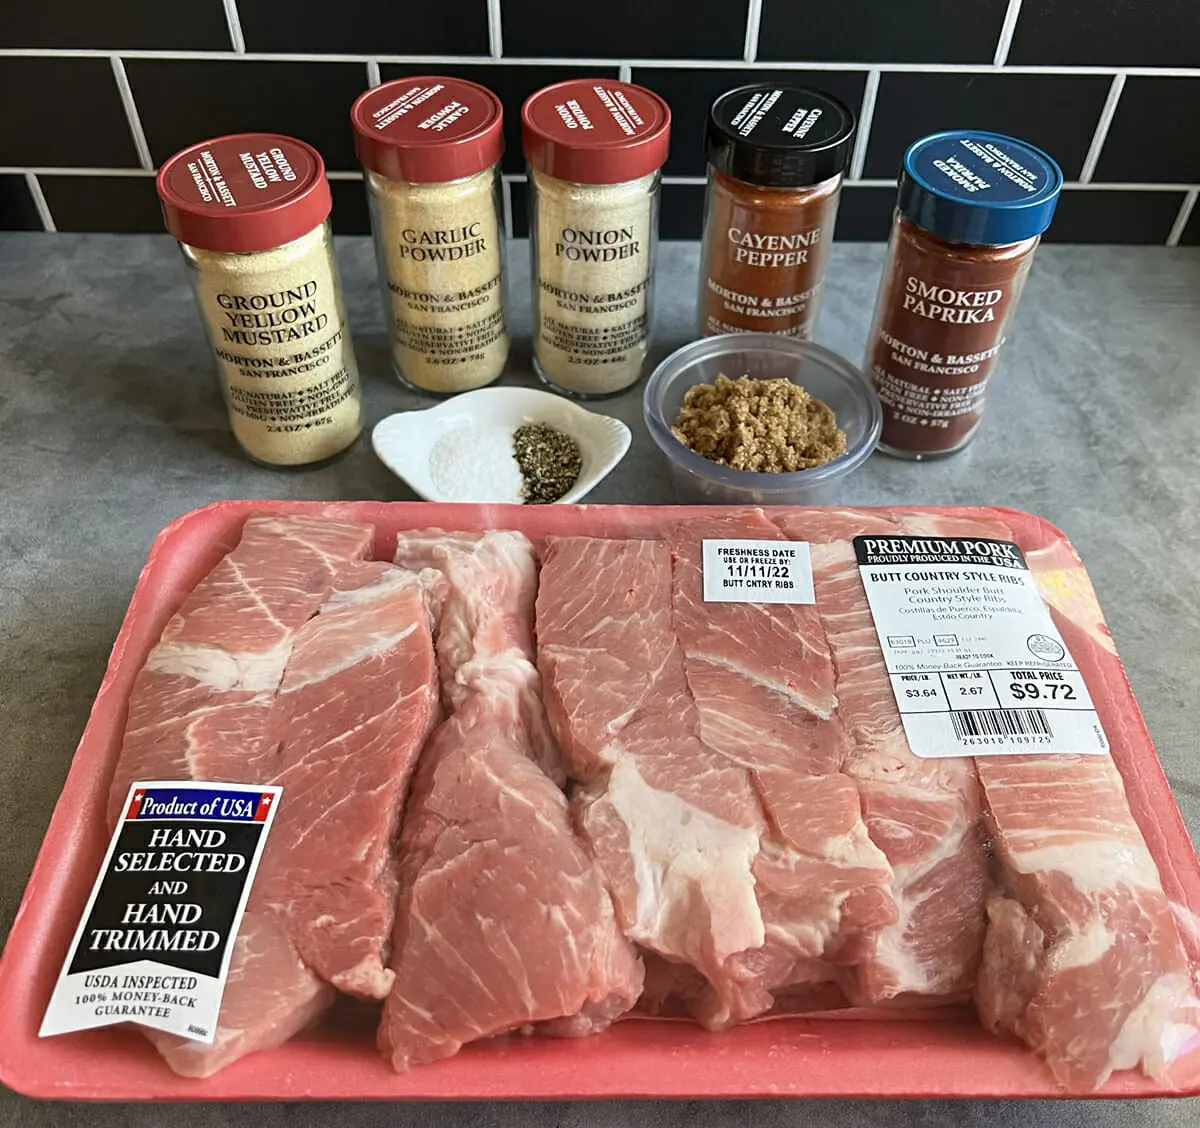 All the ingredients to make oven roasted country style pork ribs